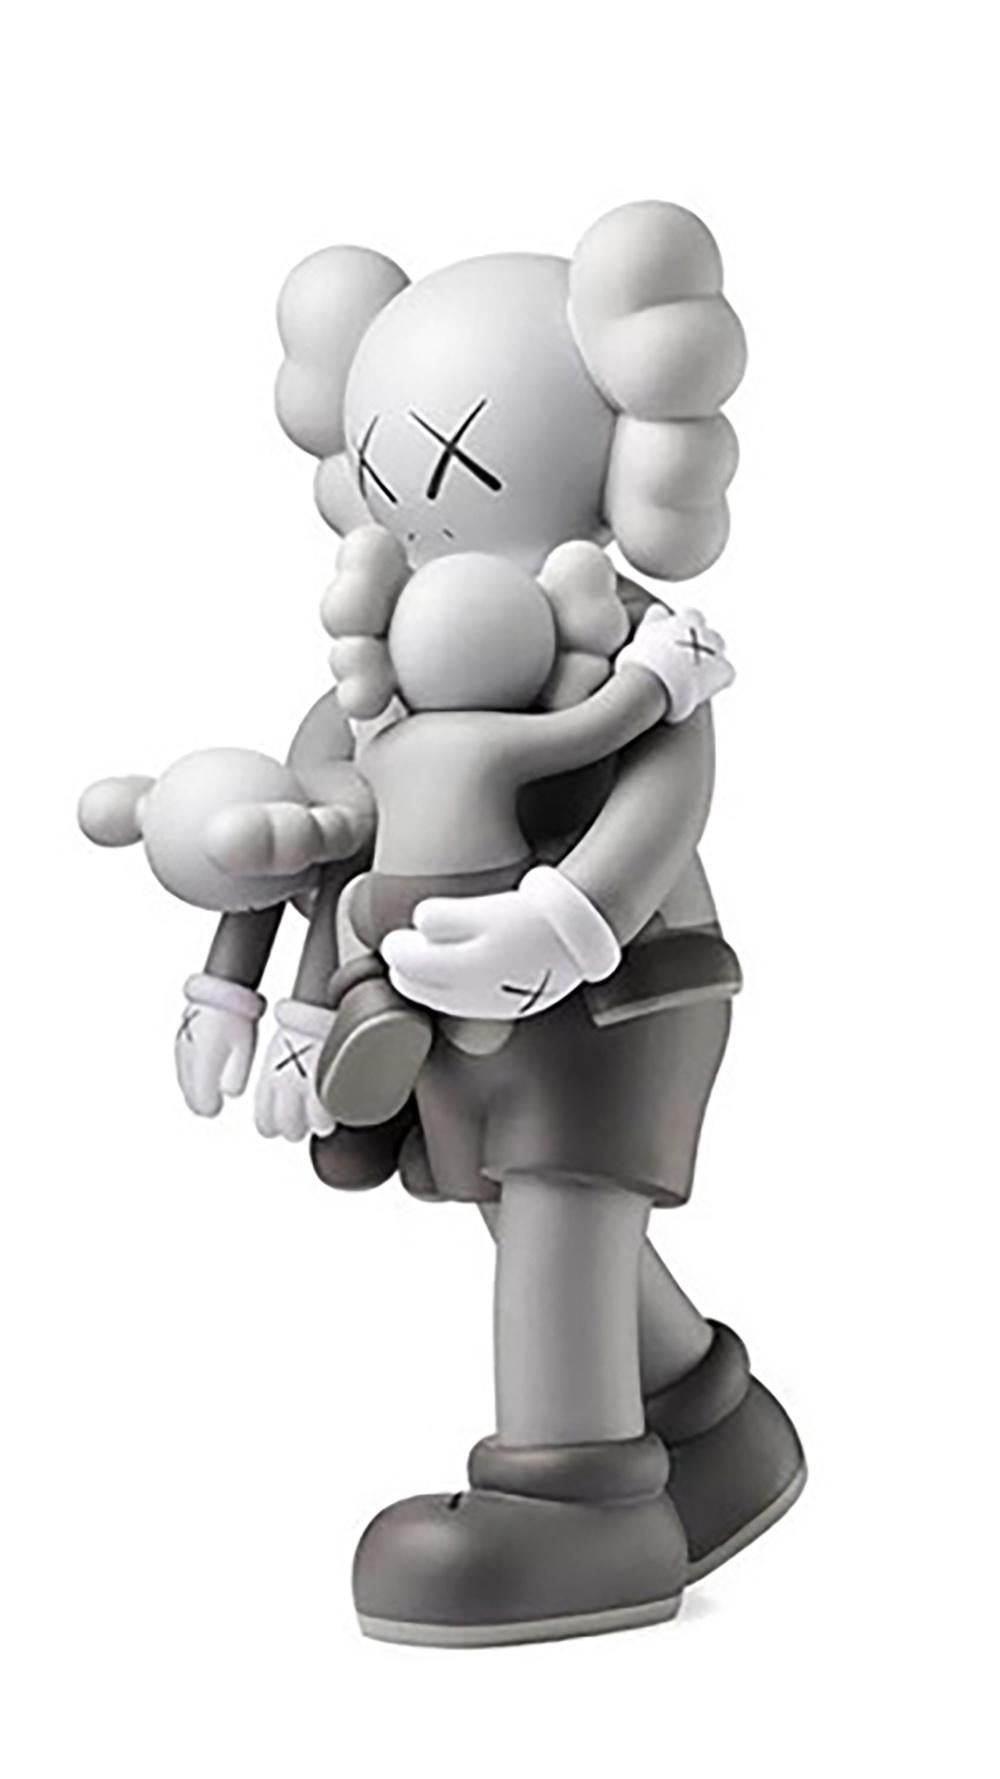 KAWS Clean Slate - set of 2 (Grey & Black version), new & unopened in its original packaging.
Sold Out versions after the artist's retrospect exhibition at the Modern Art Museum of Fort Worth

Medium: Vinyl & Cast Resin
14.25 x 7 x 7 inches